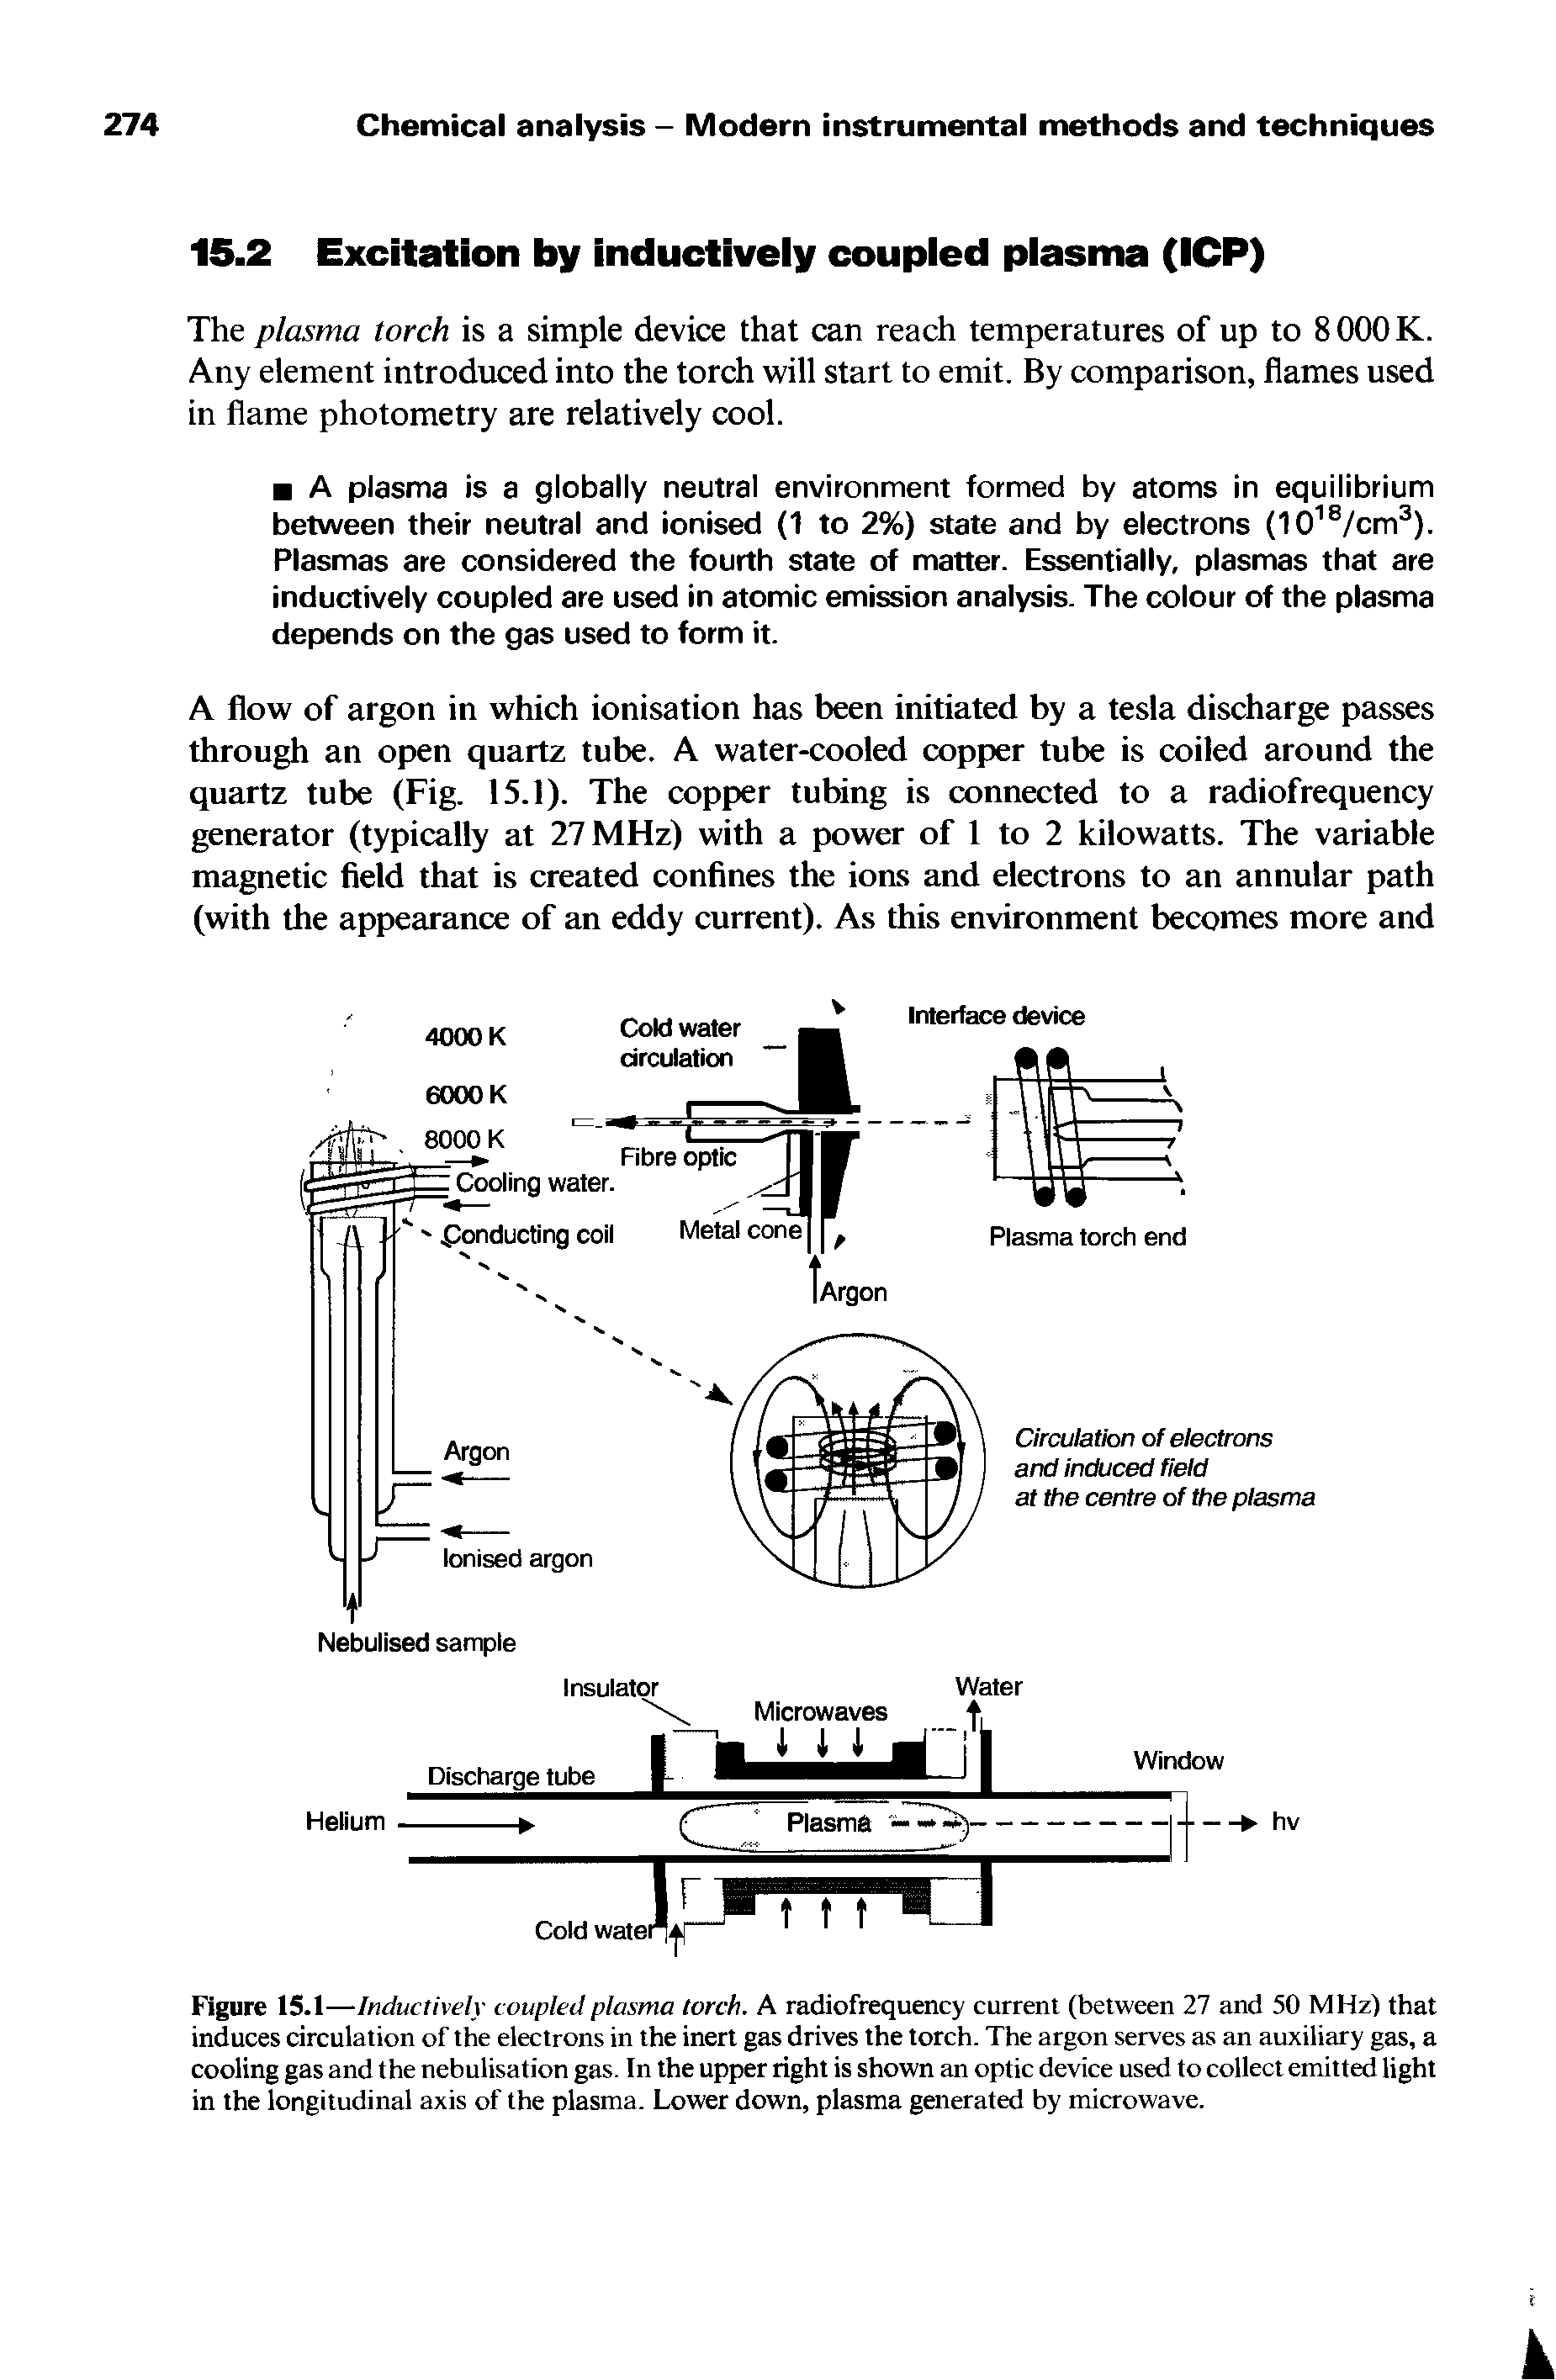 Figure 15.1—Inductively coupled plasma torch. A radiofrequency current (between 27 and 50 MHz) that induces circulation of the electrons in the inert gas drives the torch. The argon serves as an auxiliary gas, a cooling gas and the nebulisation gas. In the upper right is shown an optic device used to collect emitted light in the longitudinal axis of the plasma. Lower down, plasma generated by microwave.